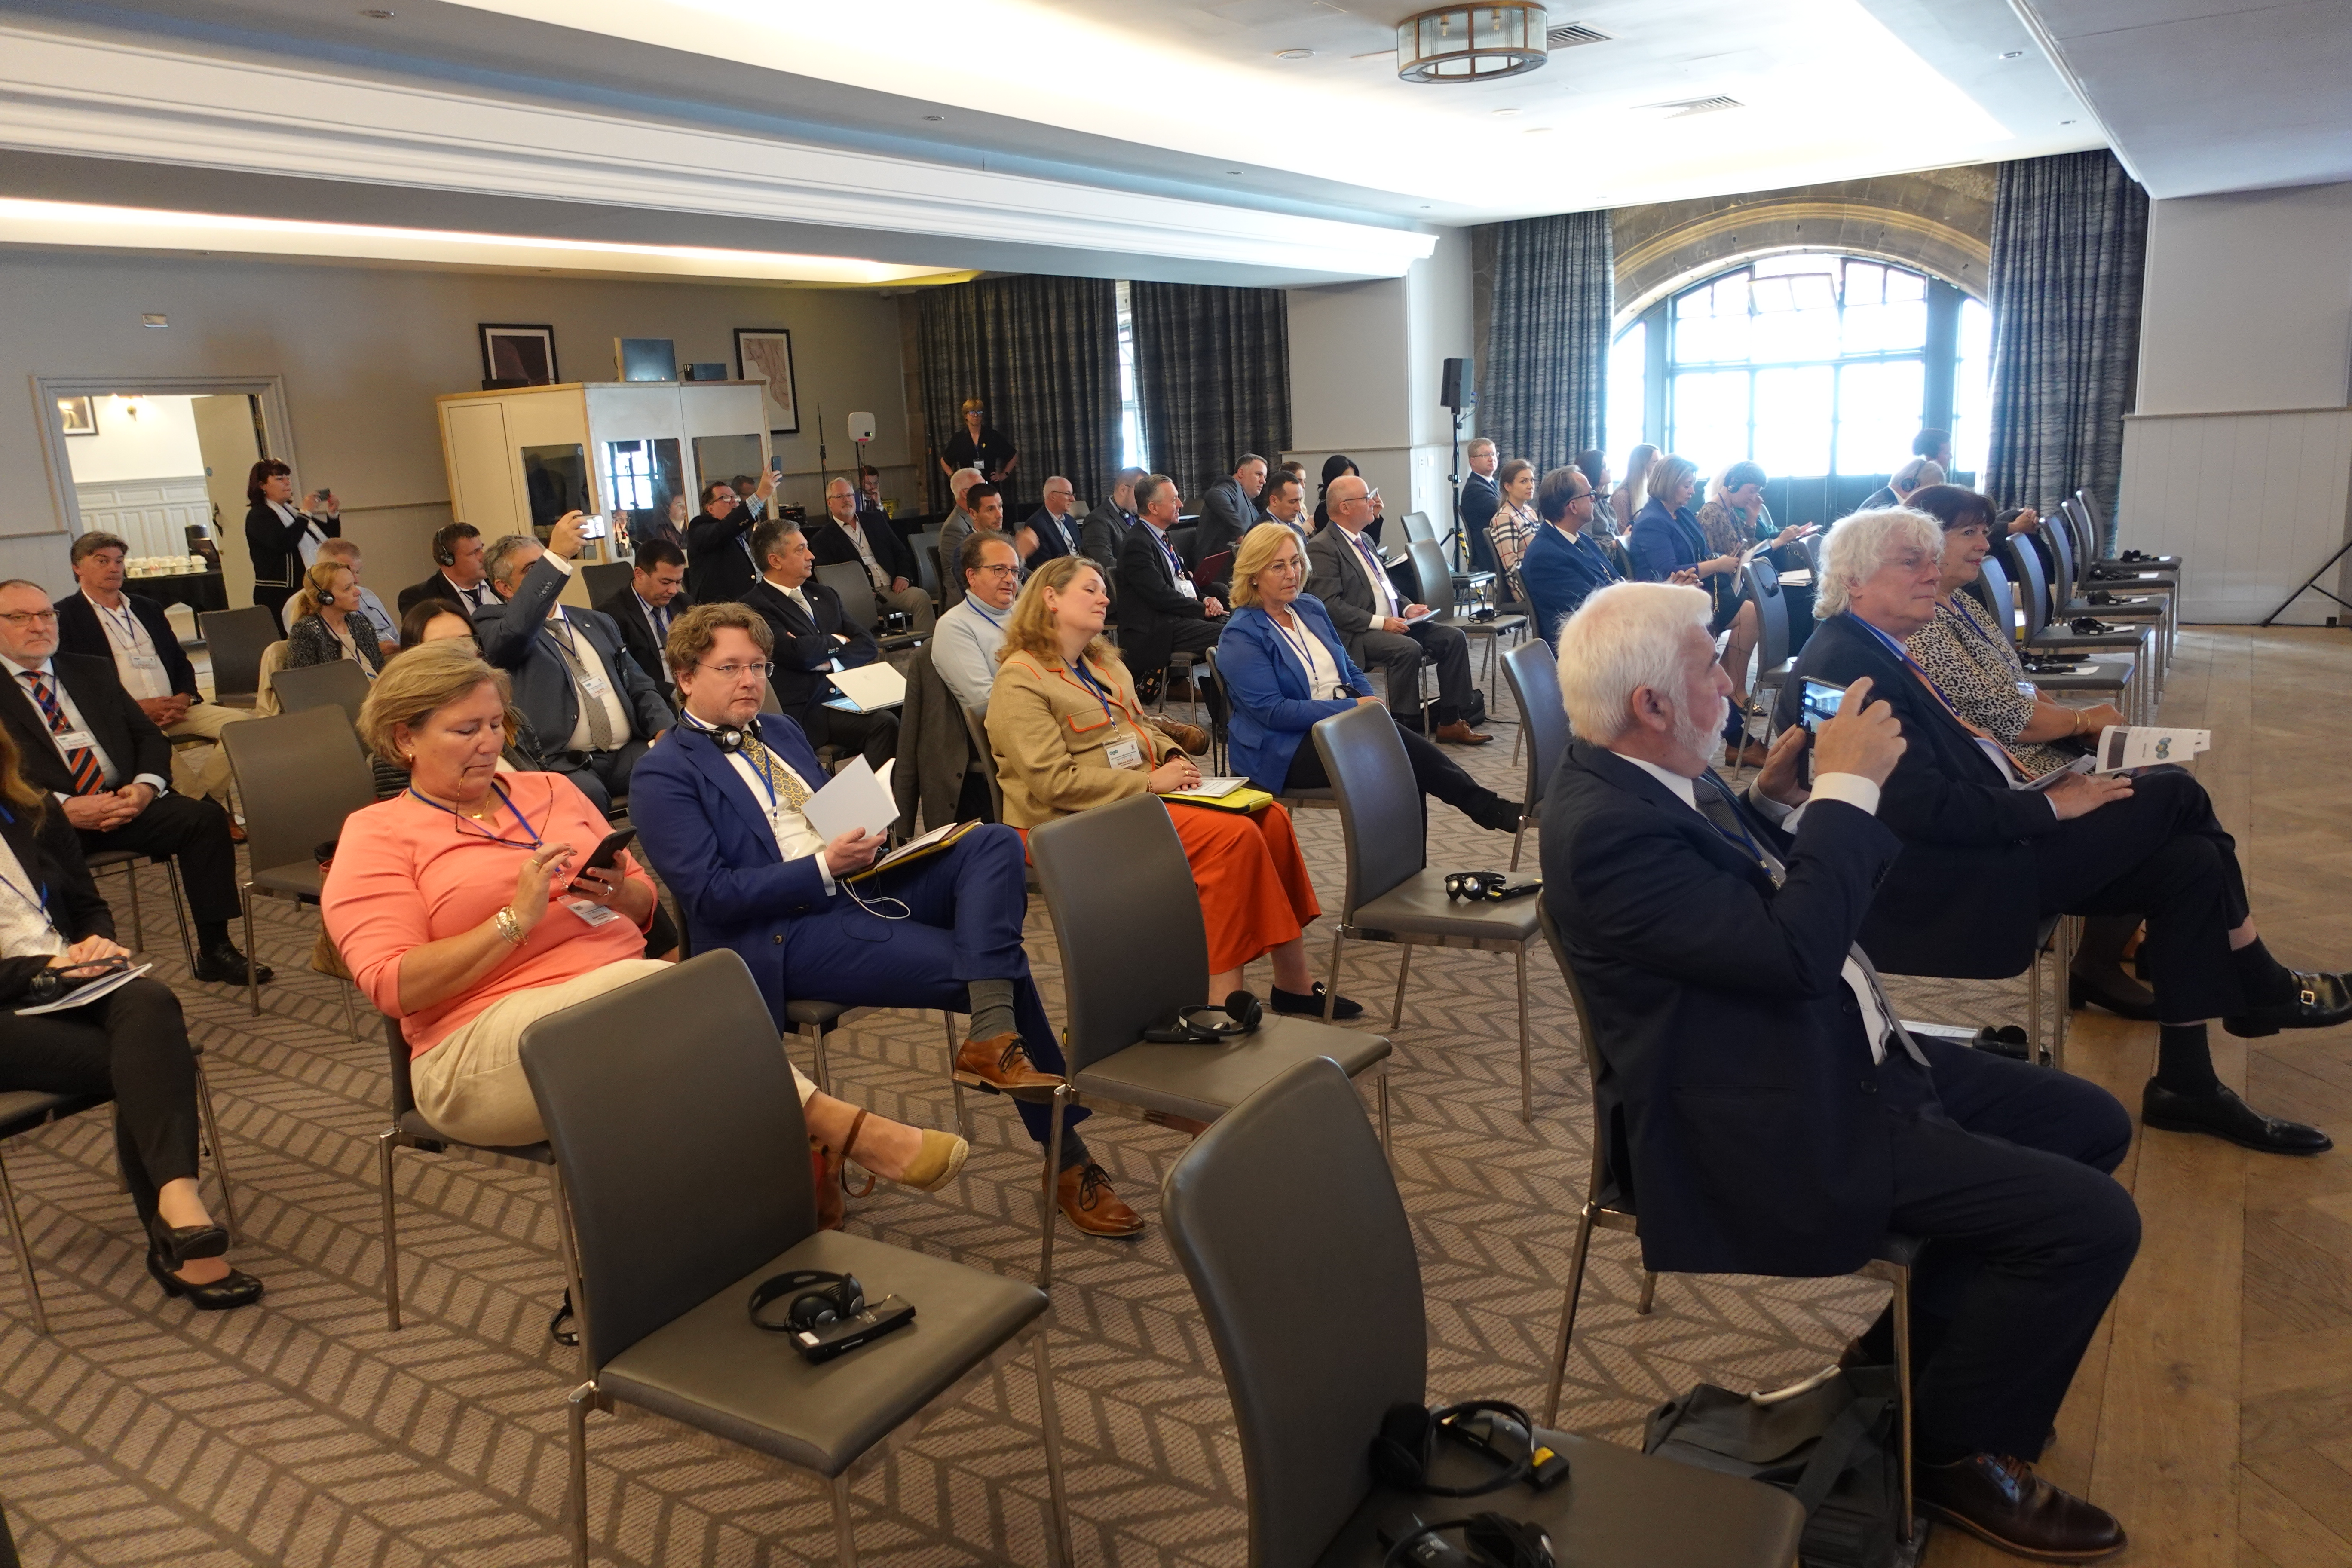 26 delegations for the Spring Permanent council of the UIHJ in Glasgow, Scotland, on 20 May 2022 and the 100th Anniversary of the Society of Messengers-at-Arms and Sheriff Officers of Scotland